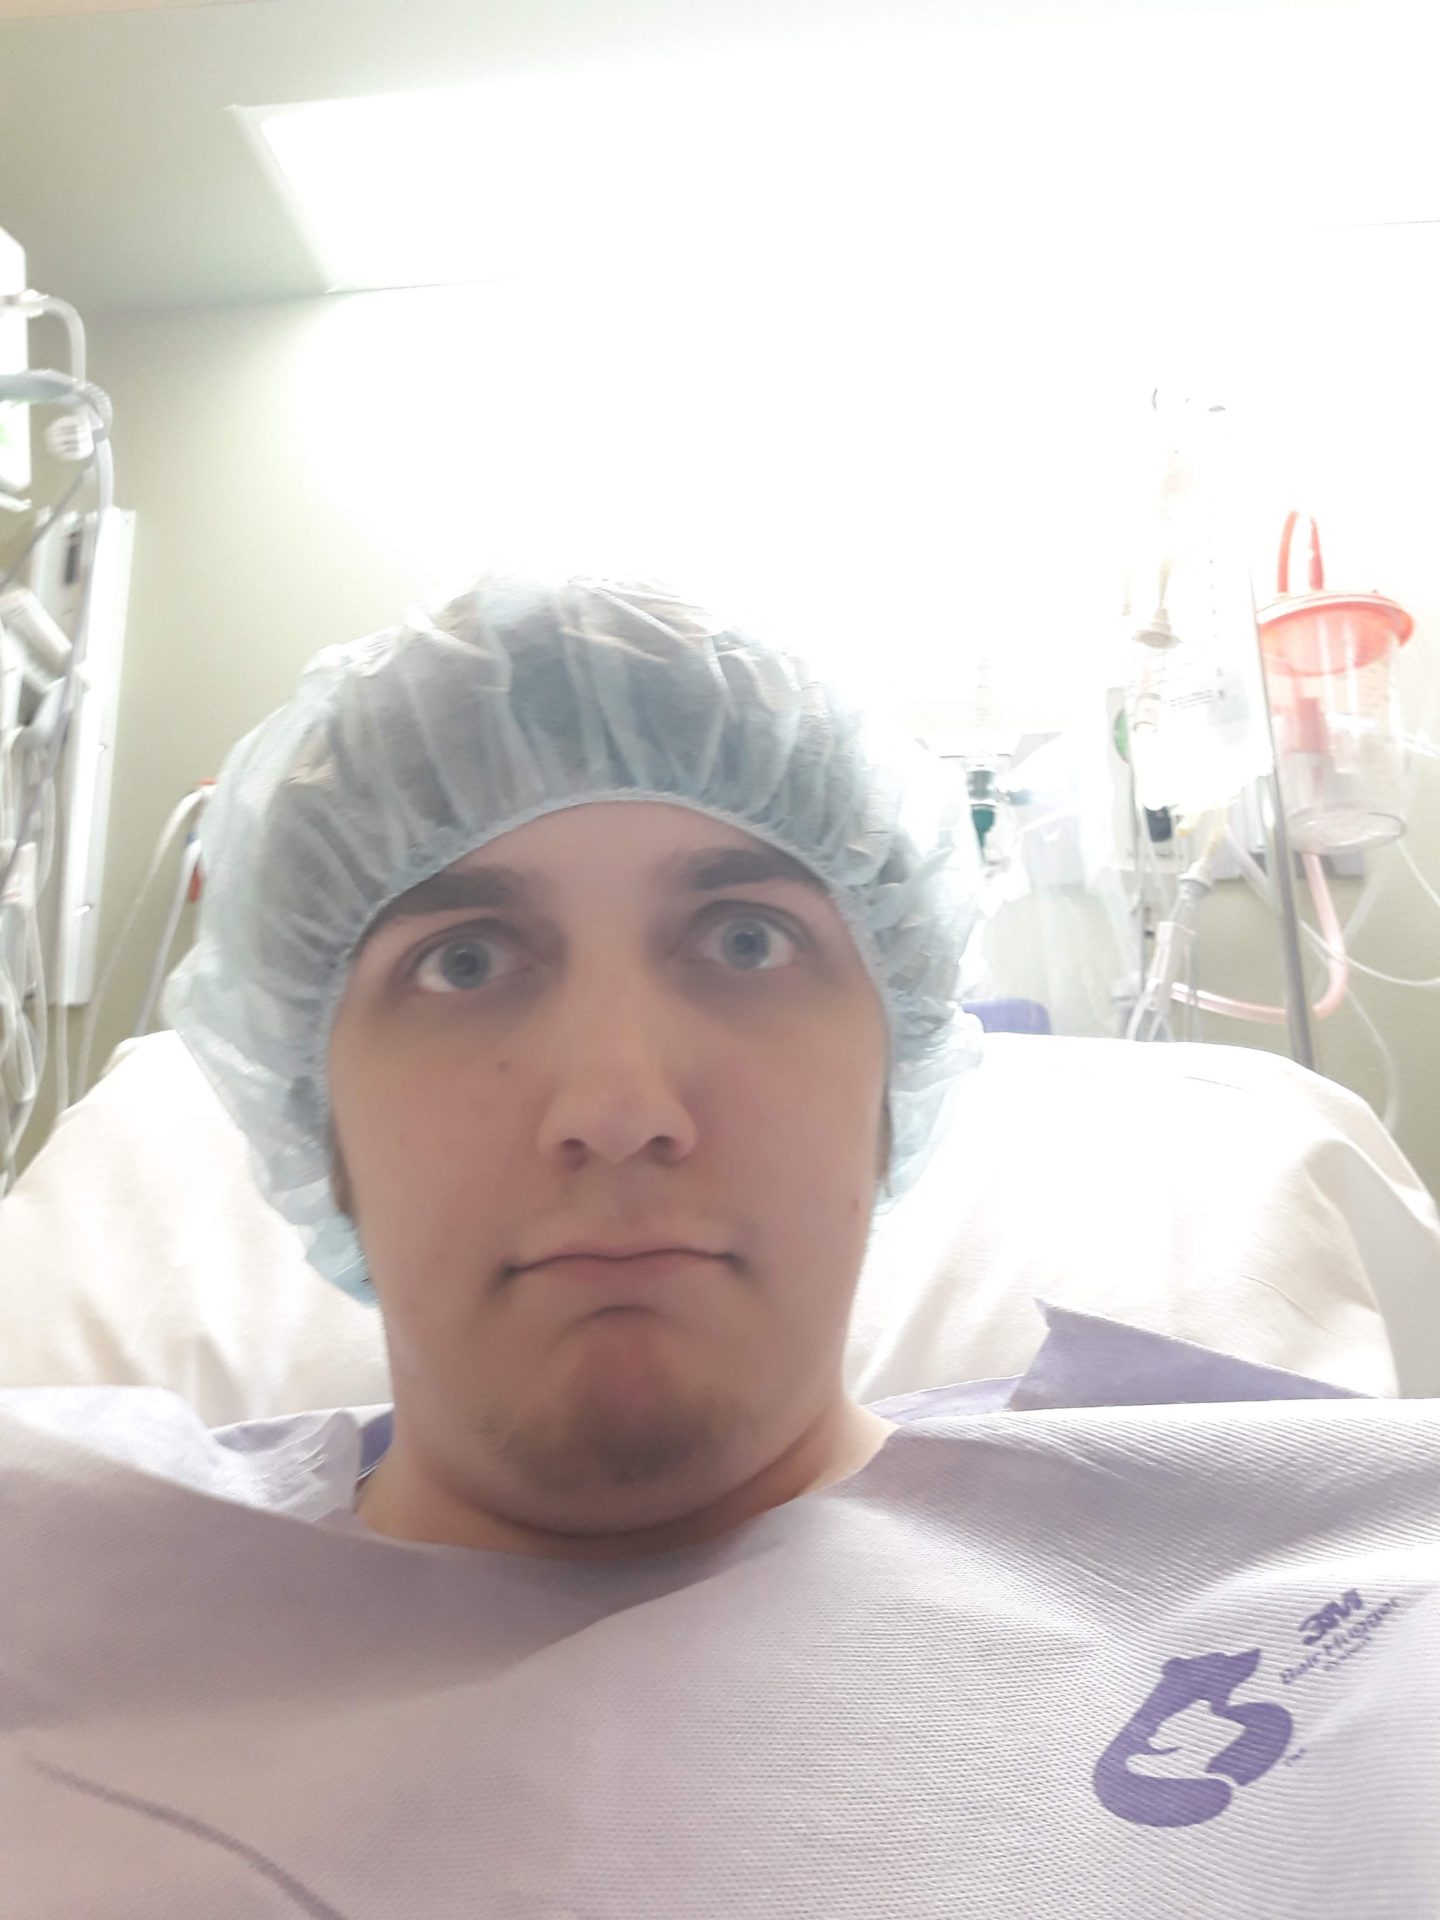 Ben had laparoscopic surgery and an orchiectomy 